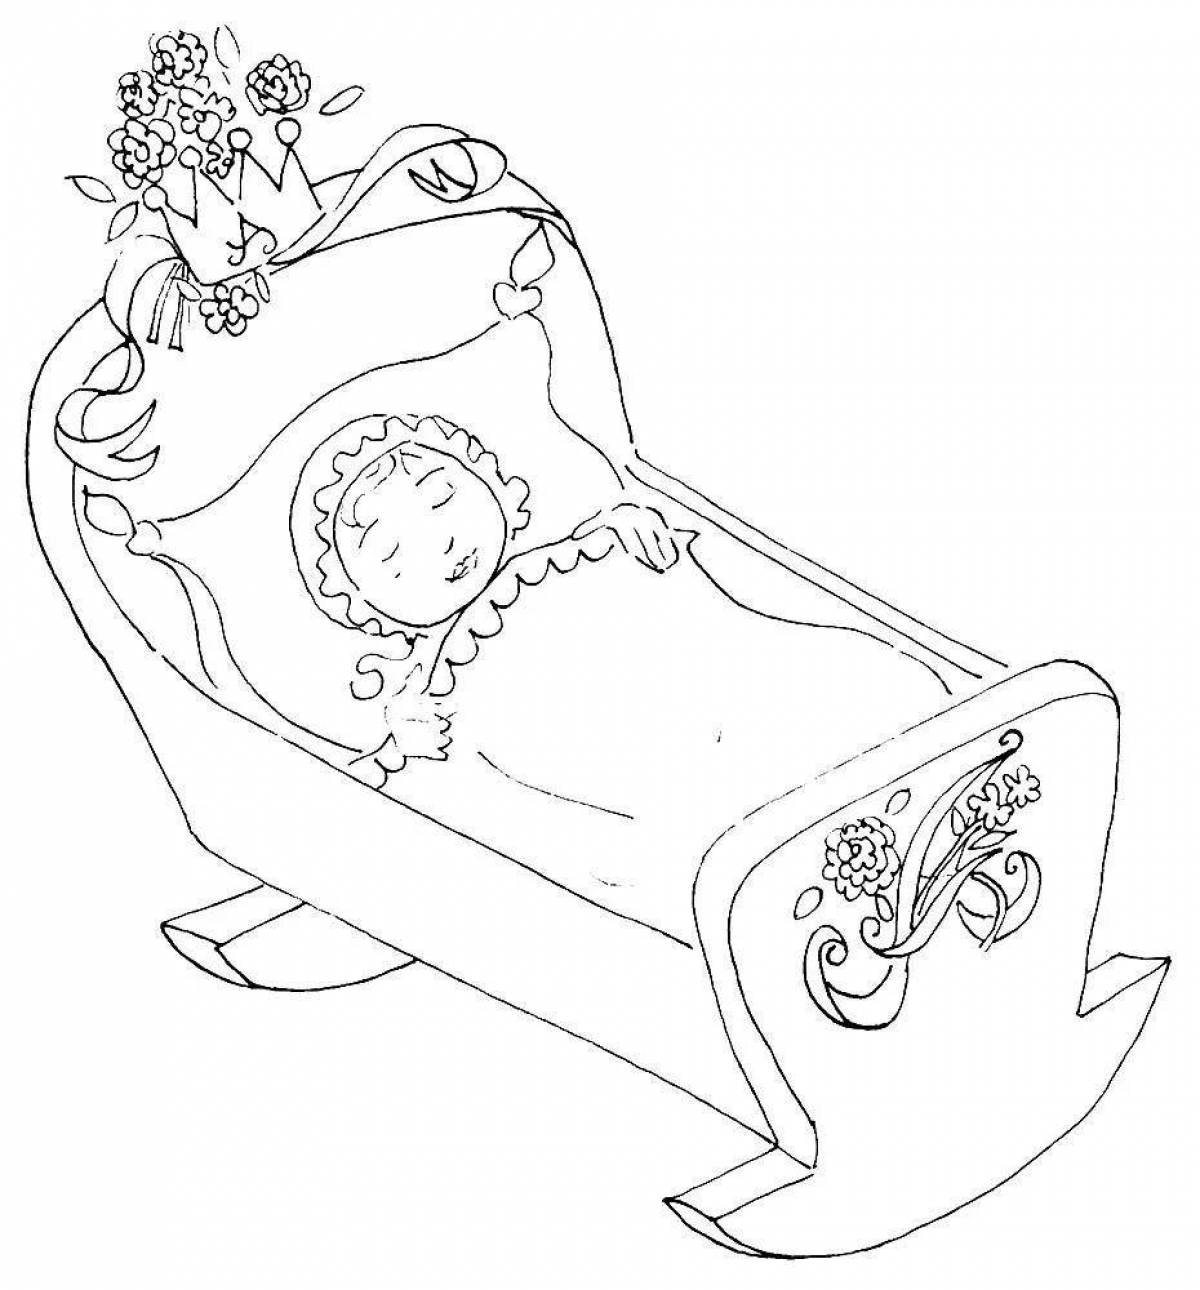 Playful crib coloring page